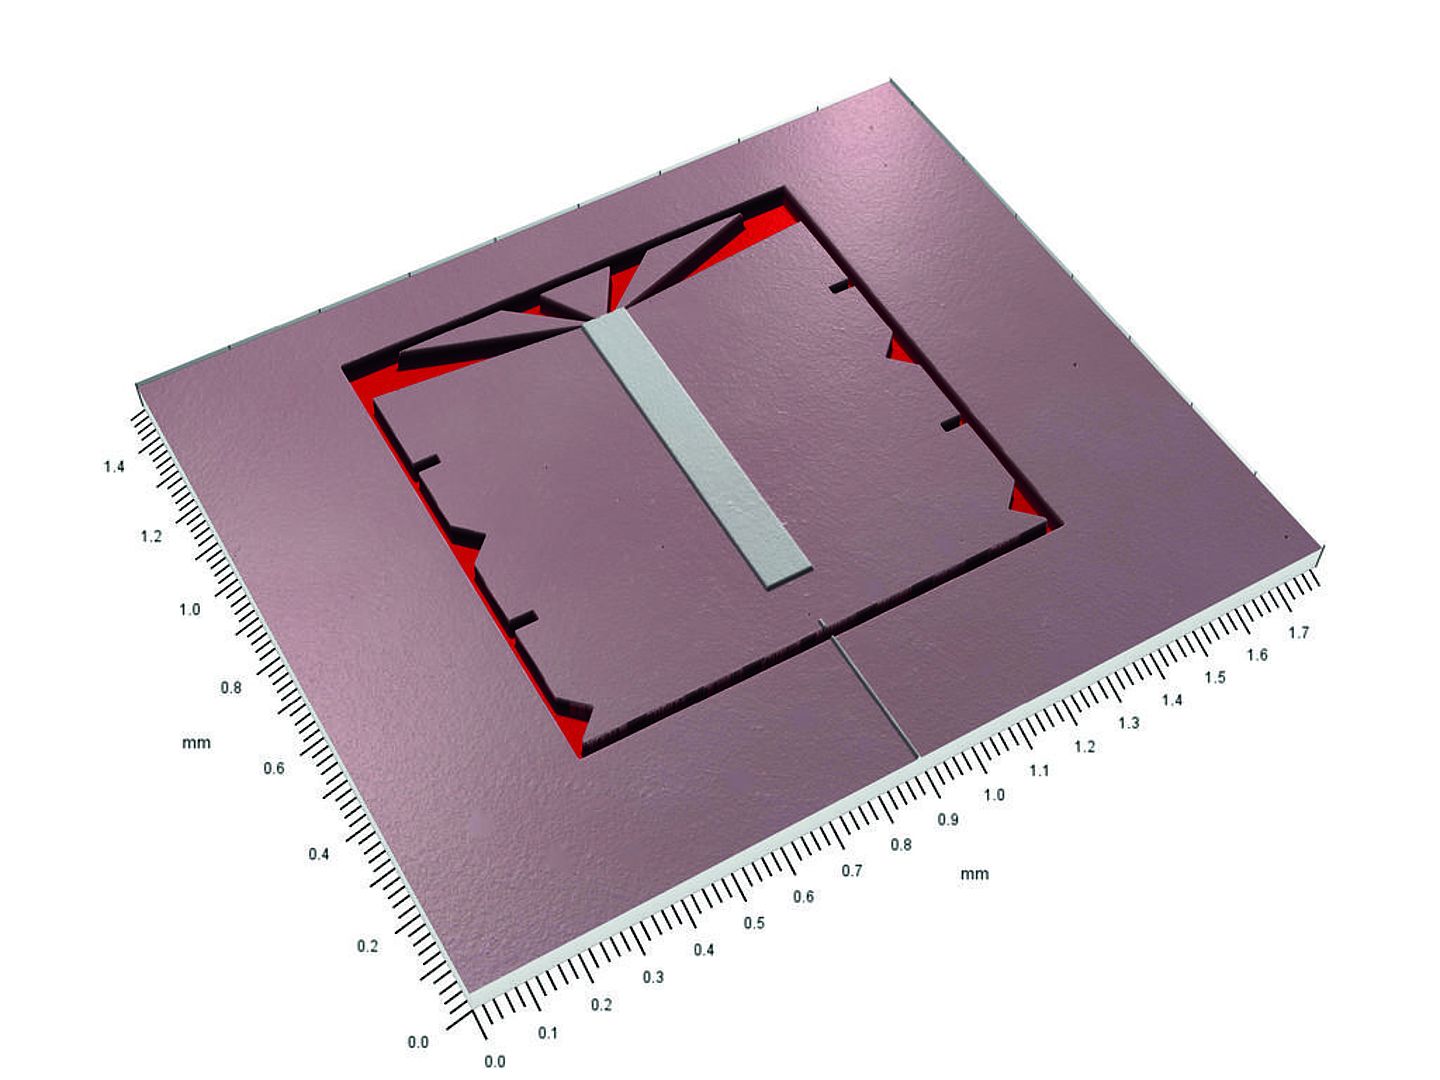 3D reconstruction of a calibration standard with 20 nm